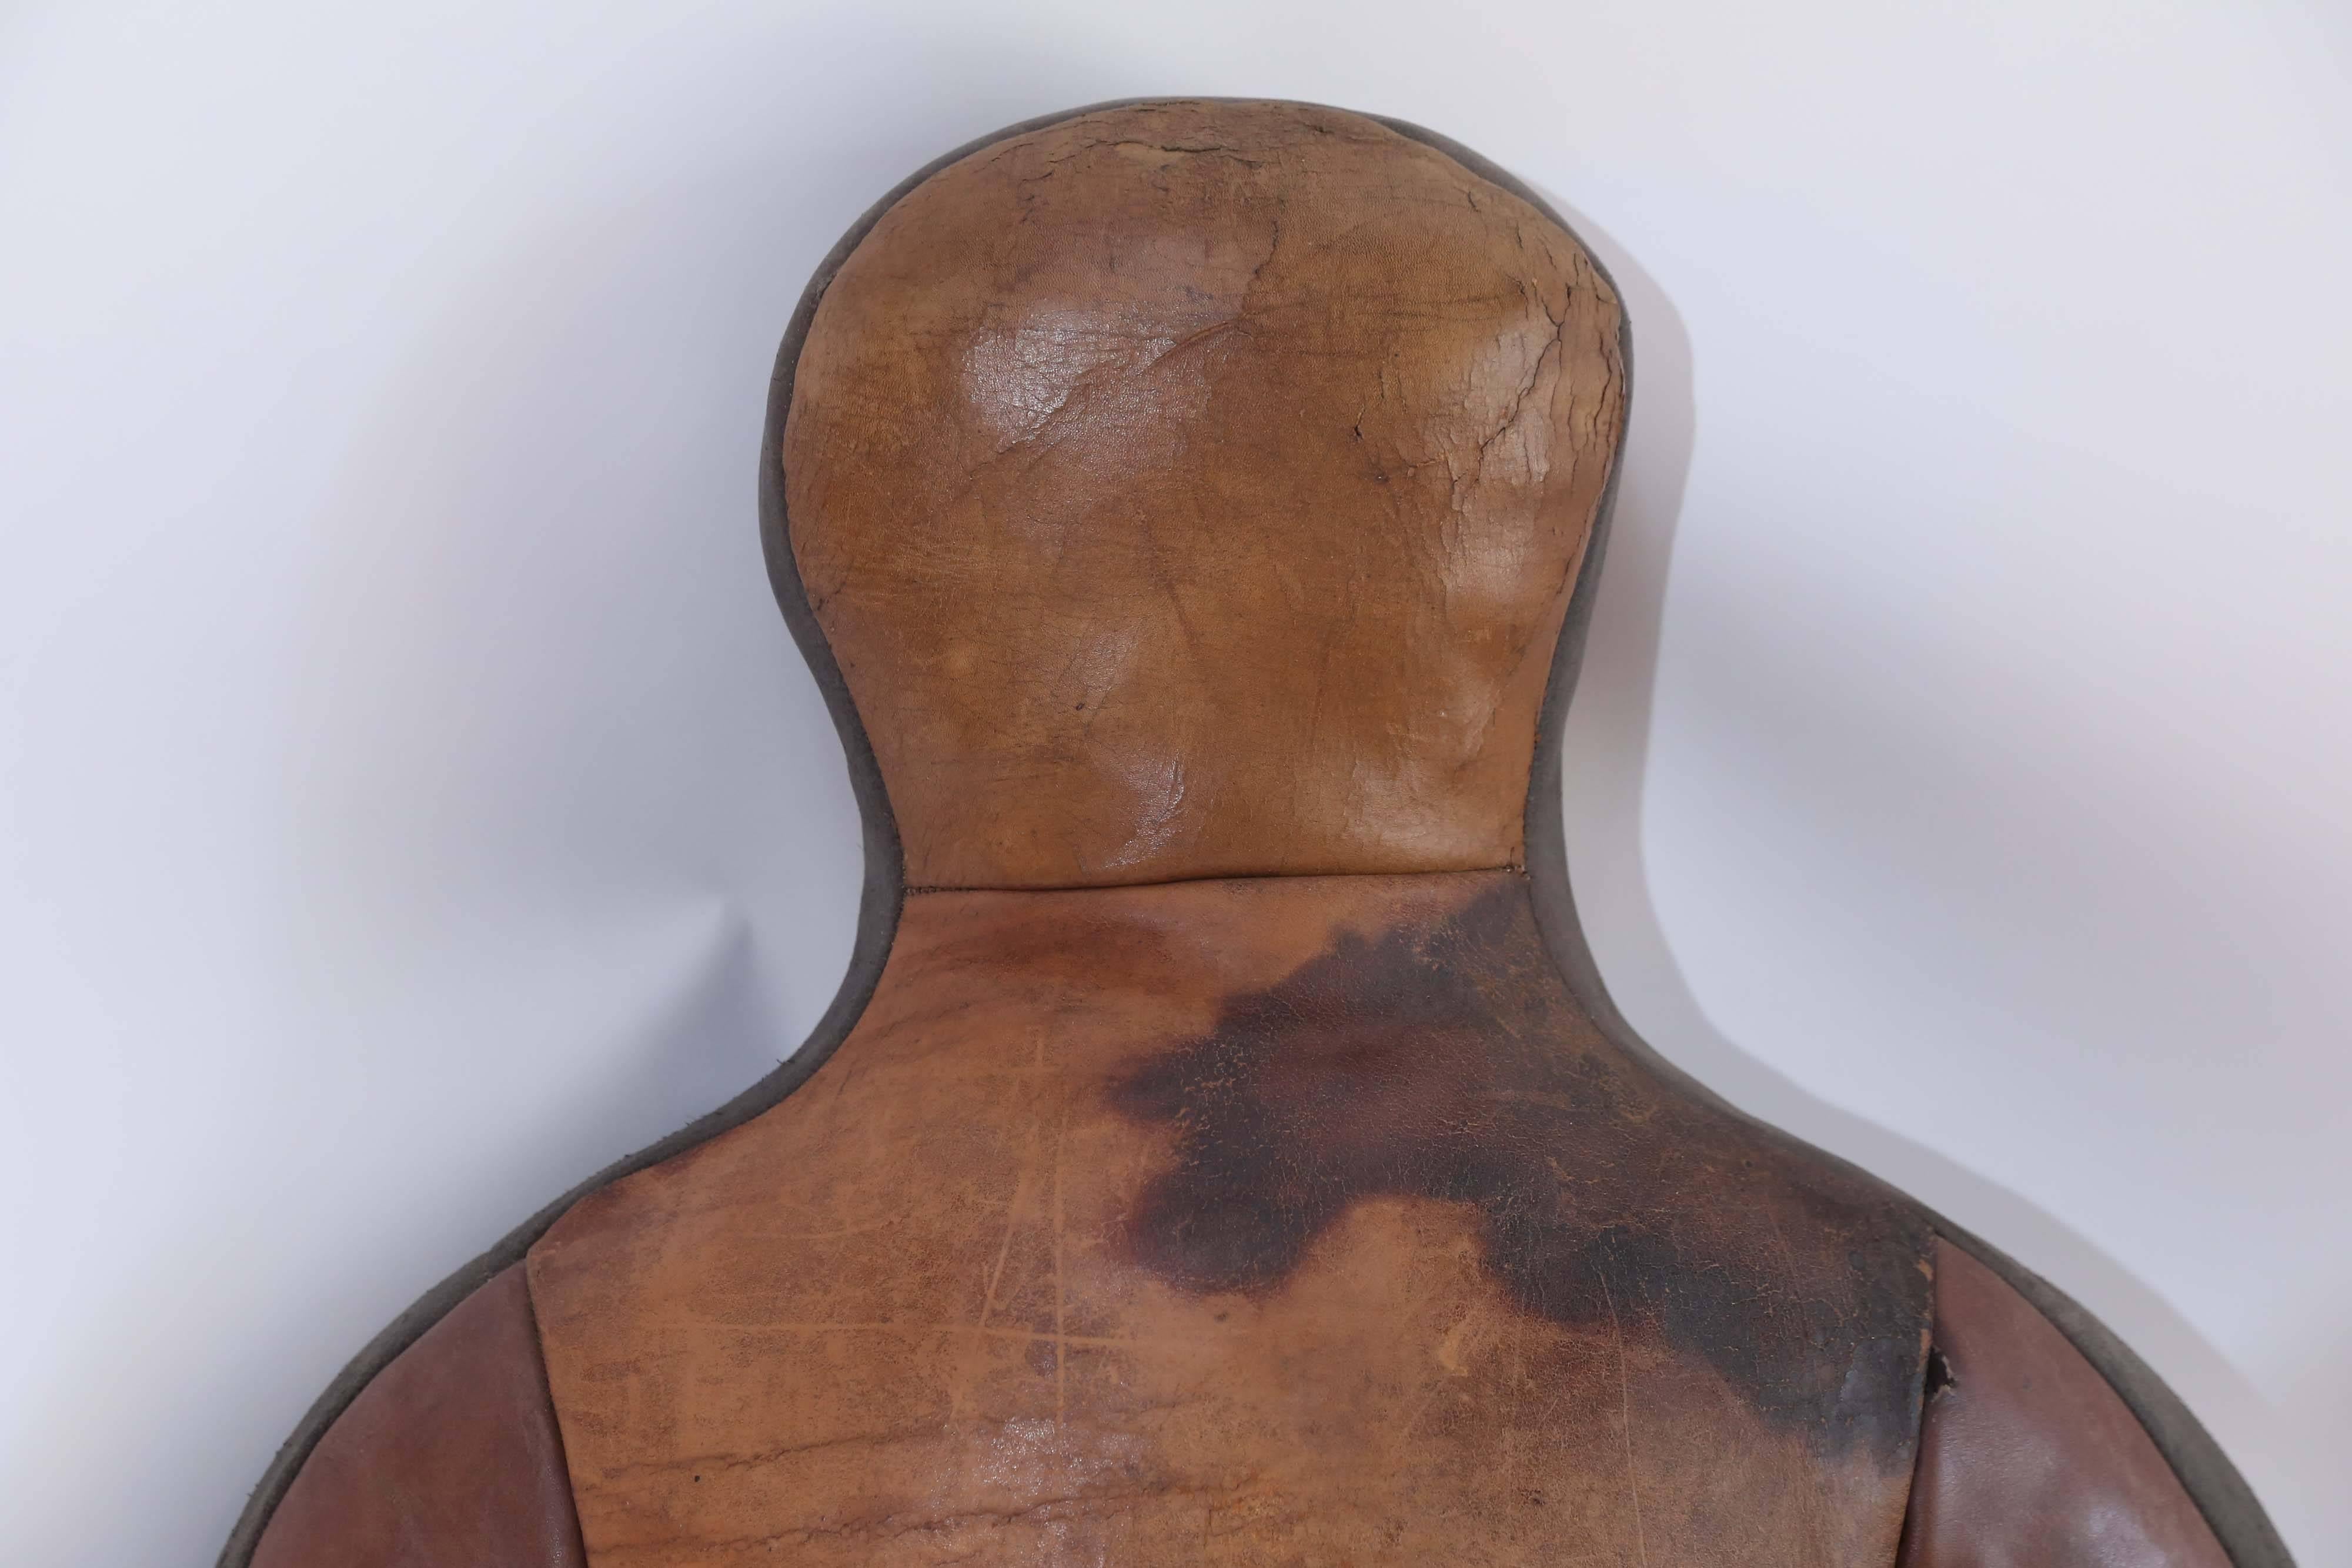 A vintage leather wrestling dummy from France. Also called a throwing dummy, this guy is still in very good condition with no splits or tears. Weighing in at 45 pounds, a bit of fun for the eye or just the right guy to take your frustrations out on.